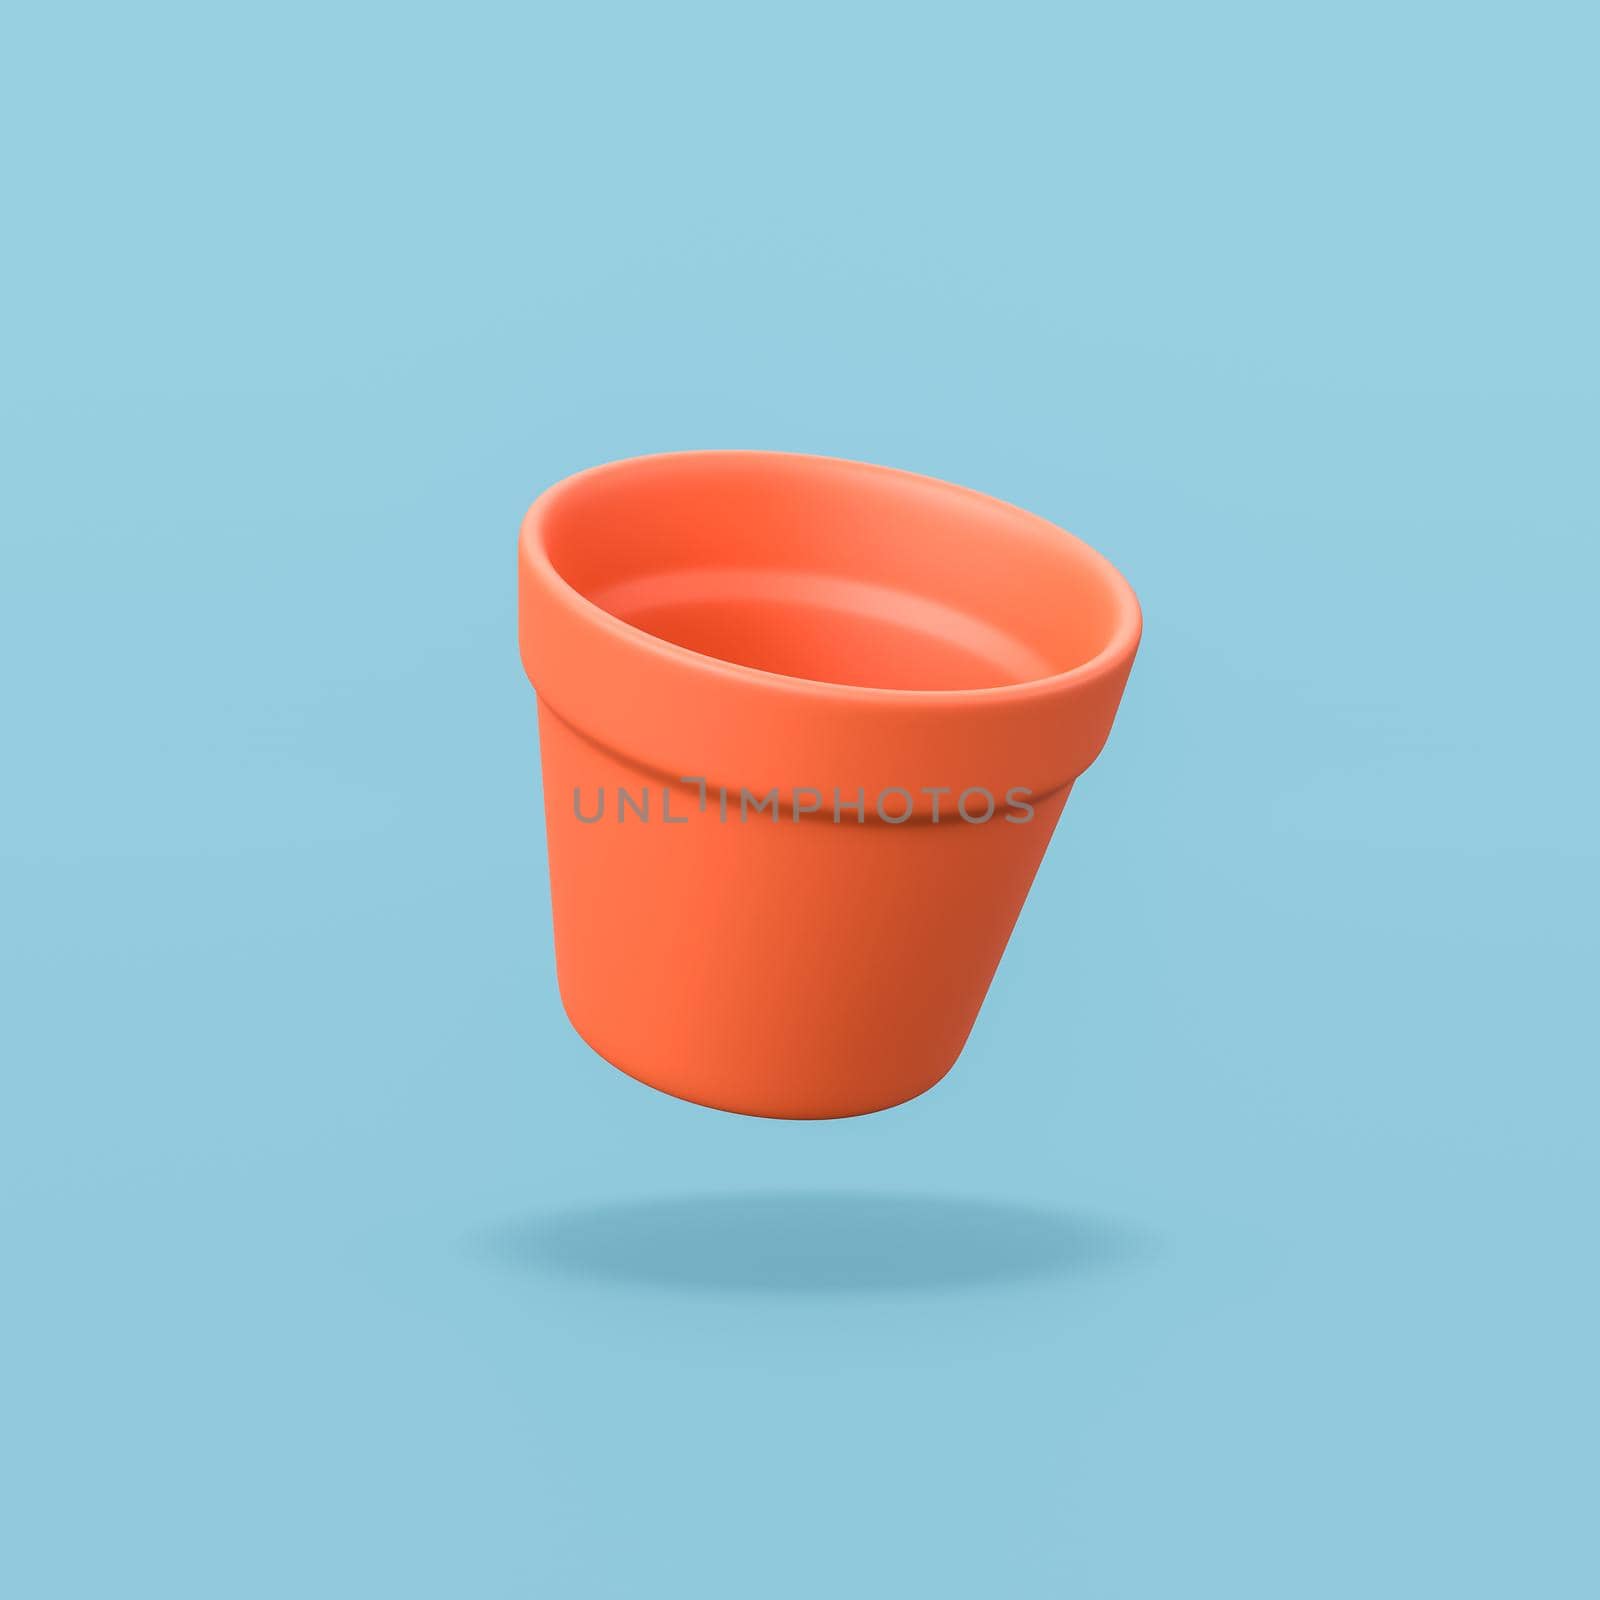 Earthenware Empty Flowerpot Isolated on Flat Blue Background with Shadow 3D Illustration